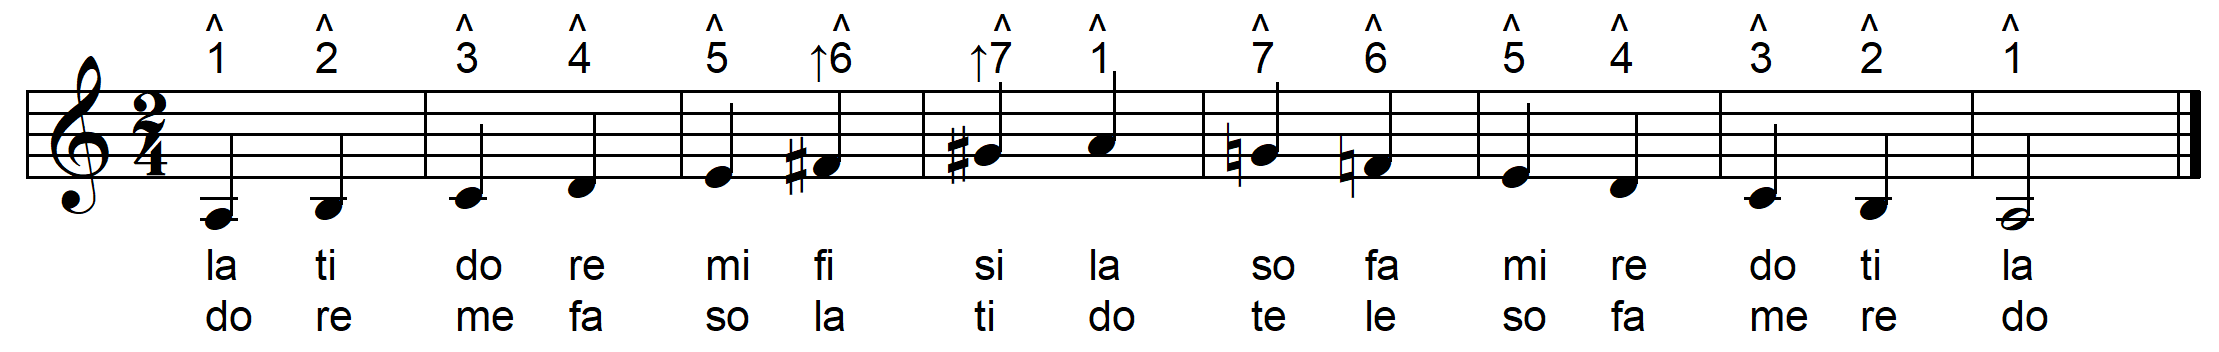 melodic minor scale with solfege and scale degree numbers